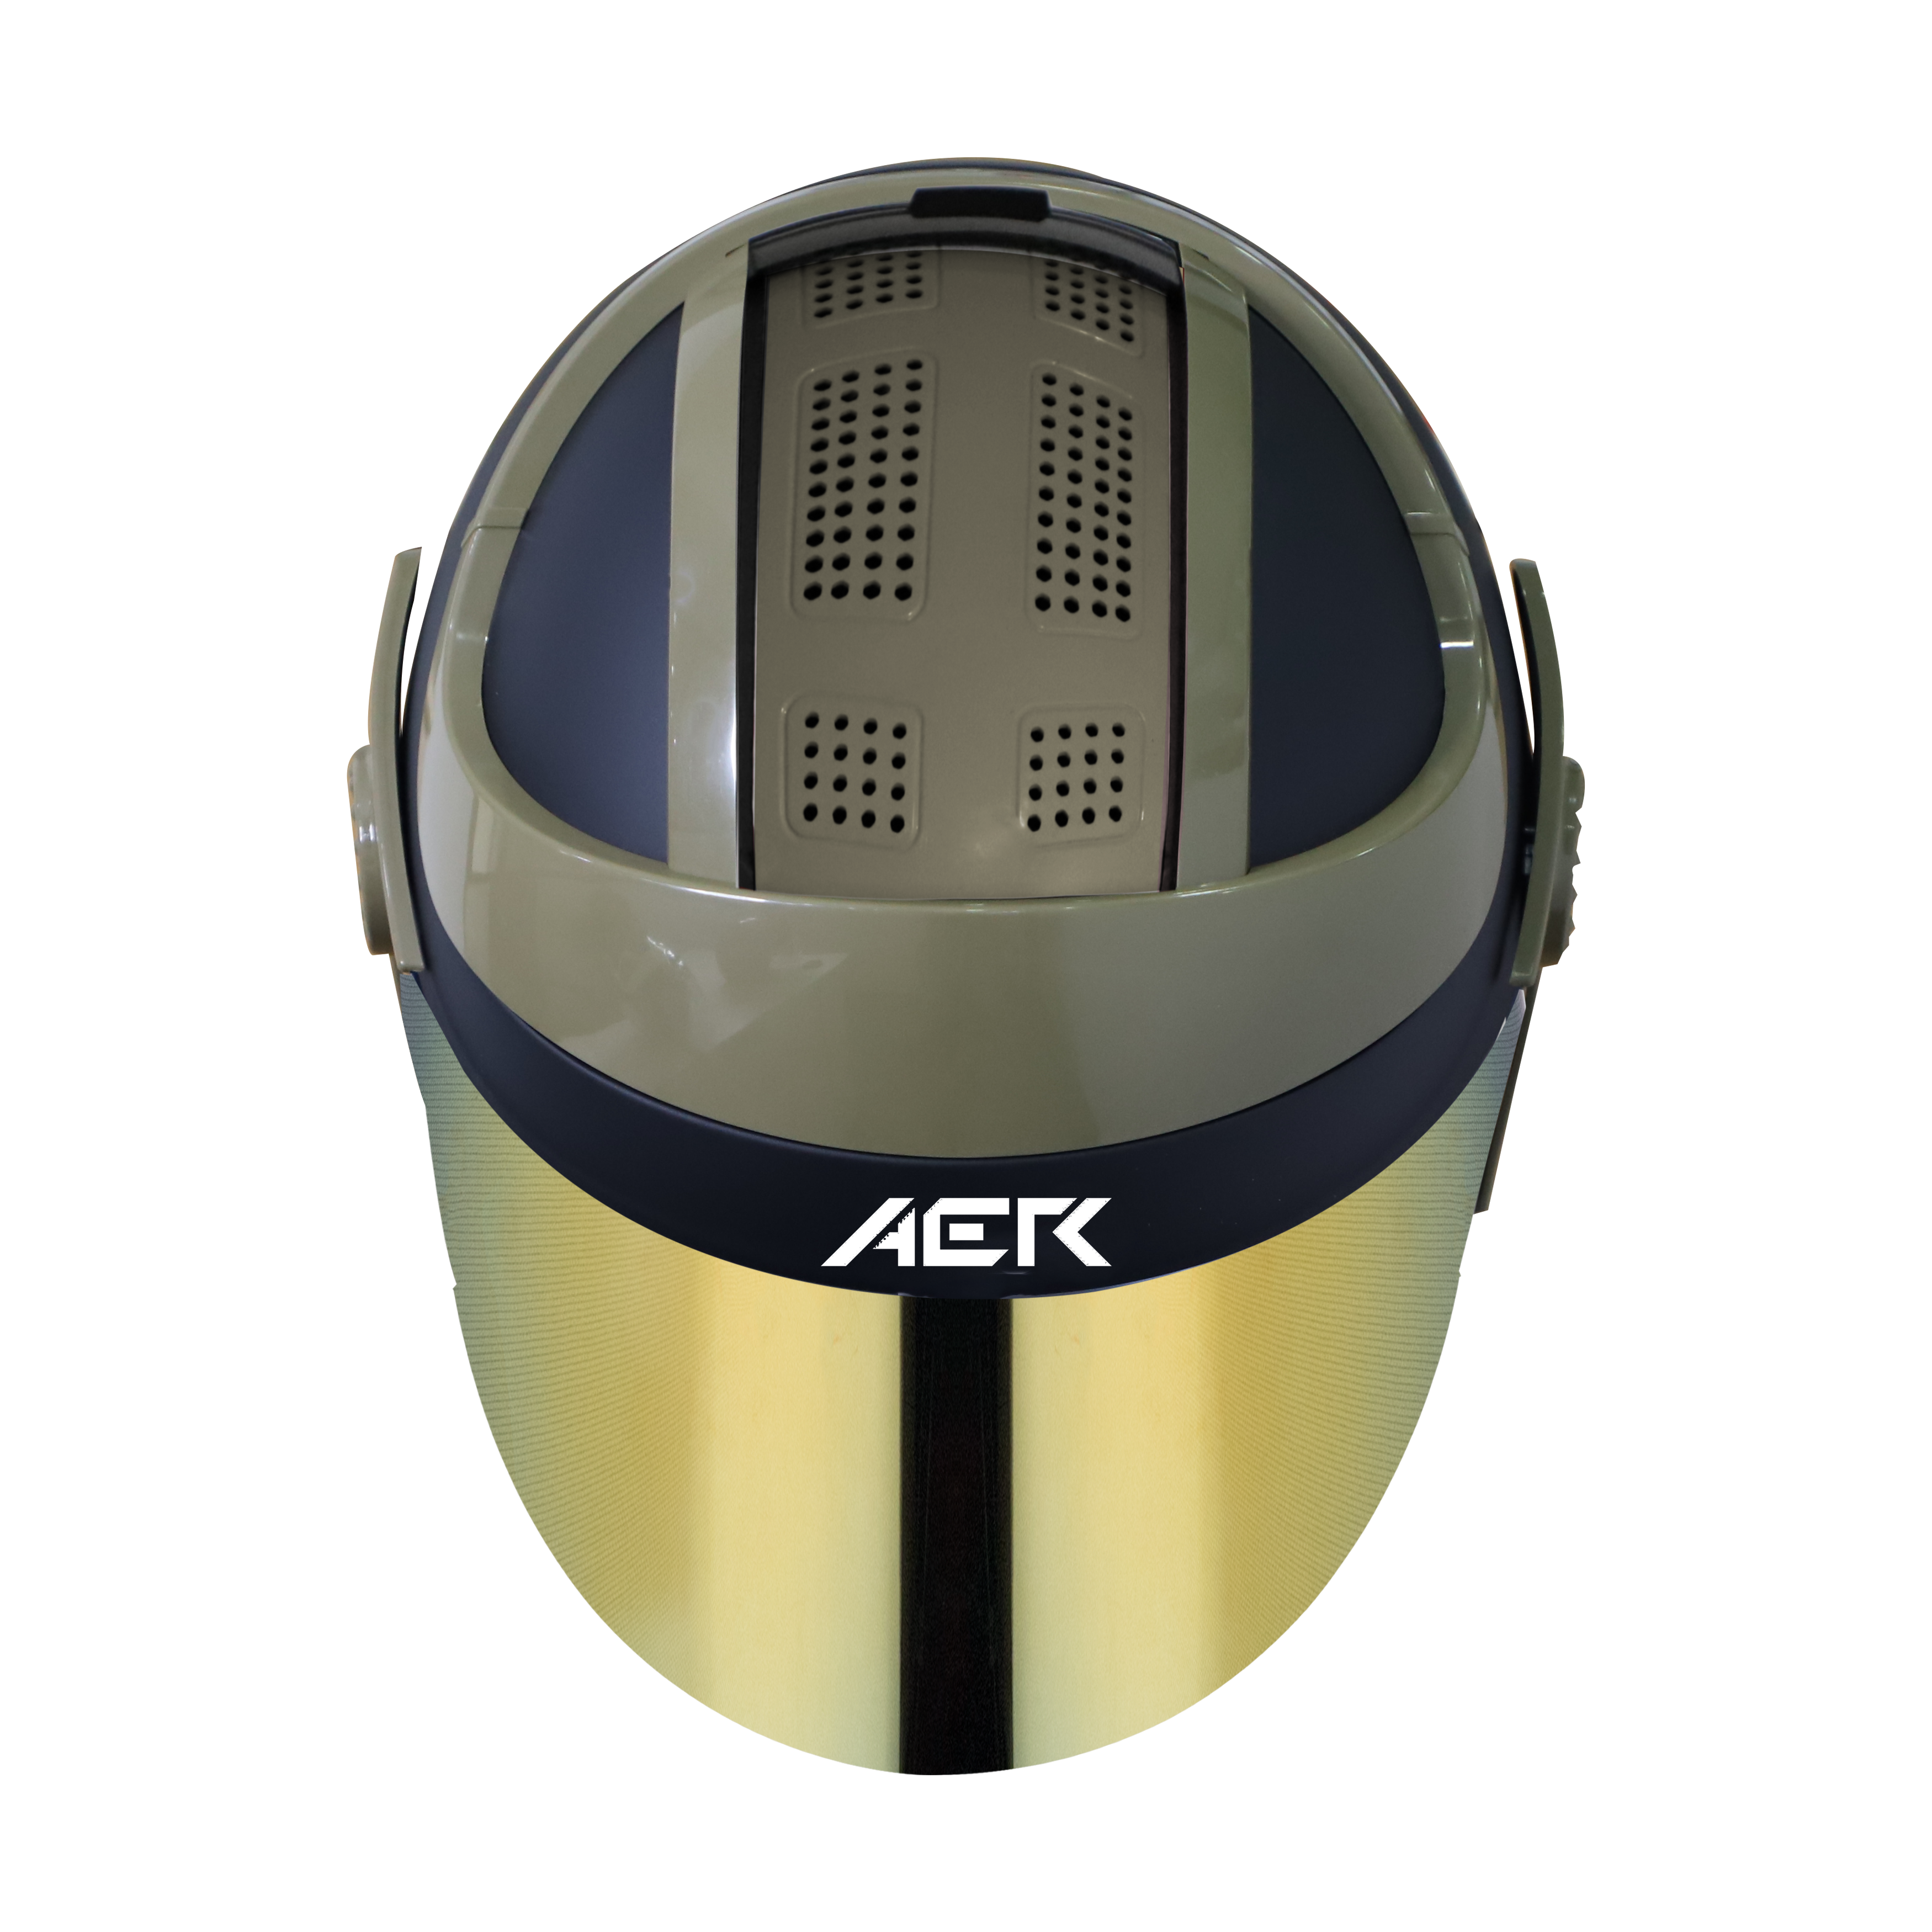 SB-29 AER MAT BLACK WITH DESERT STORM (FITTED WITH CLEAR VISOR WITH EXTRA CHROME GOLD VISOR FREE) 